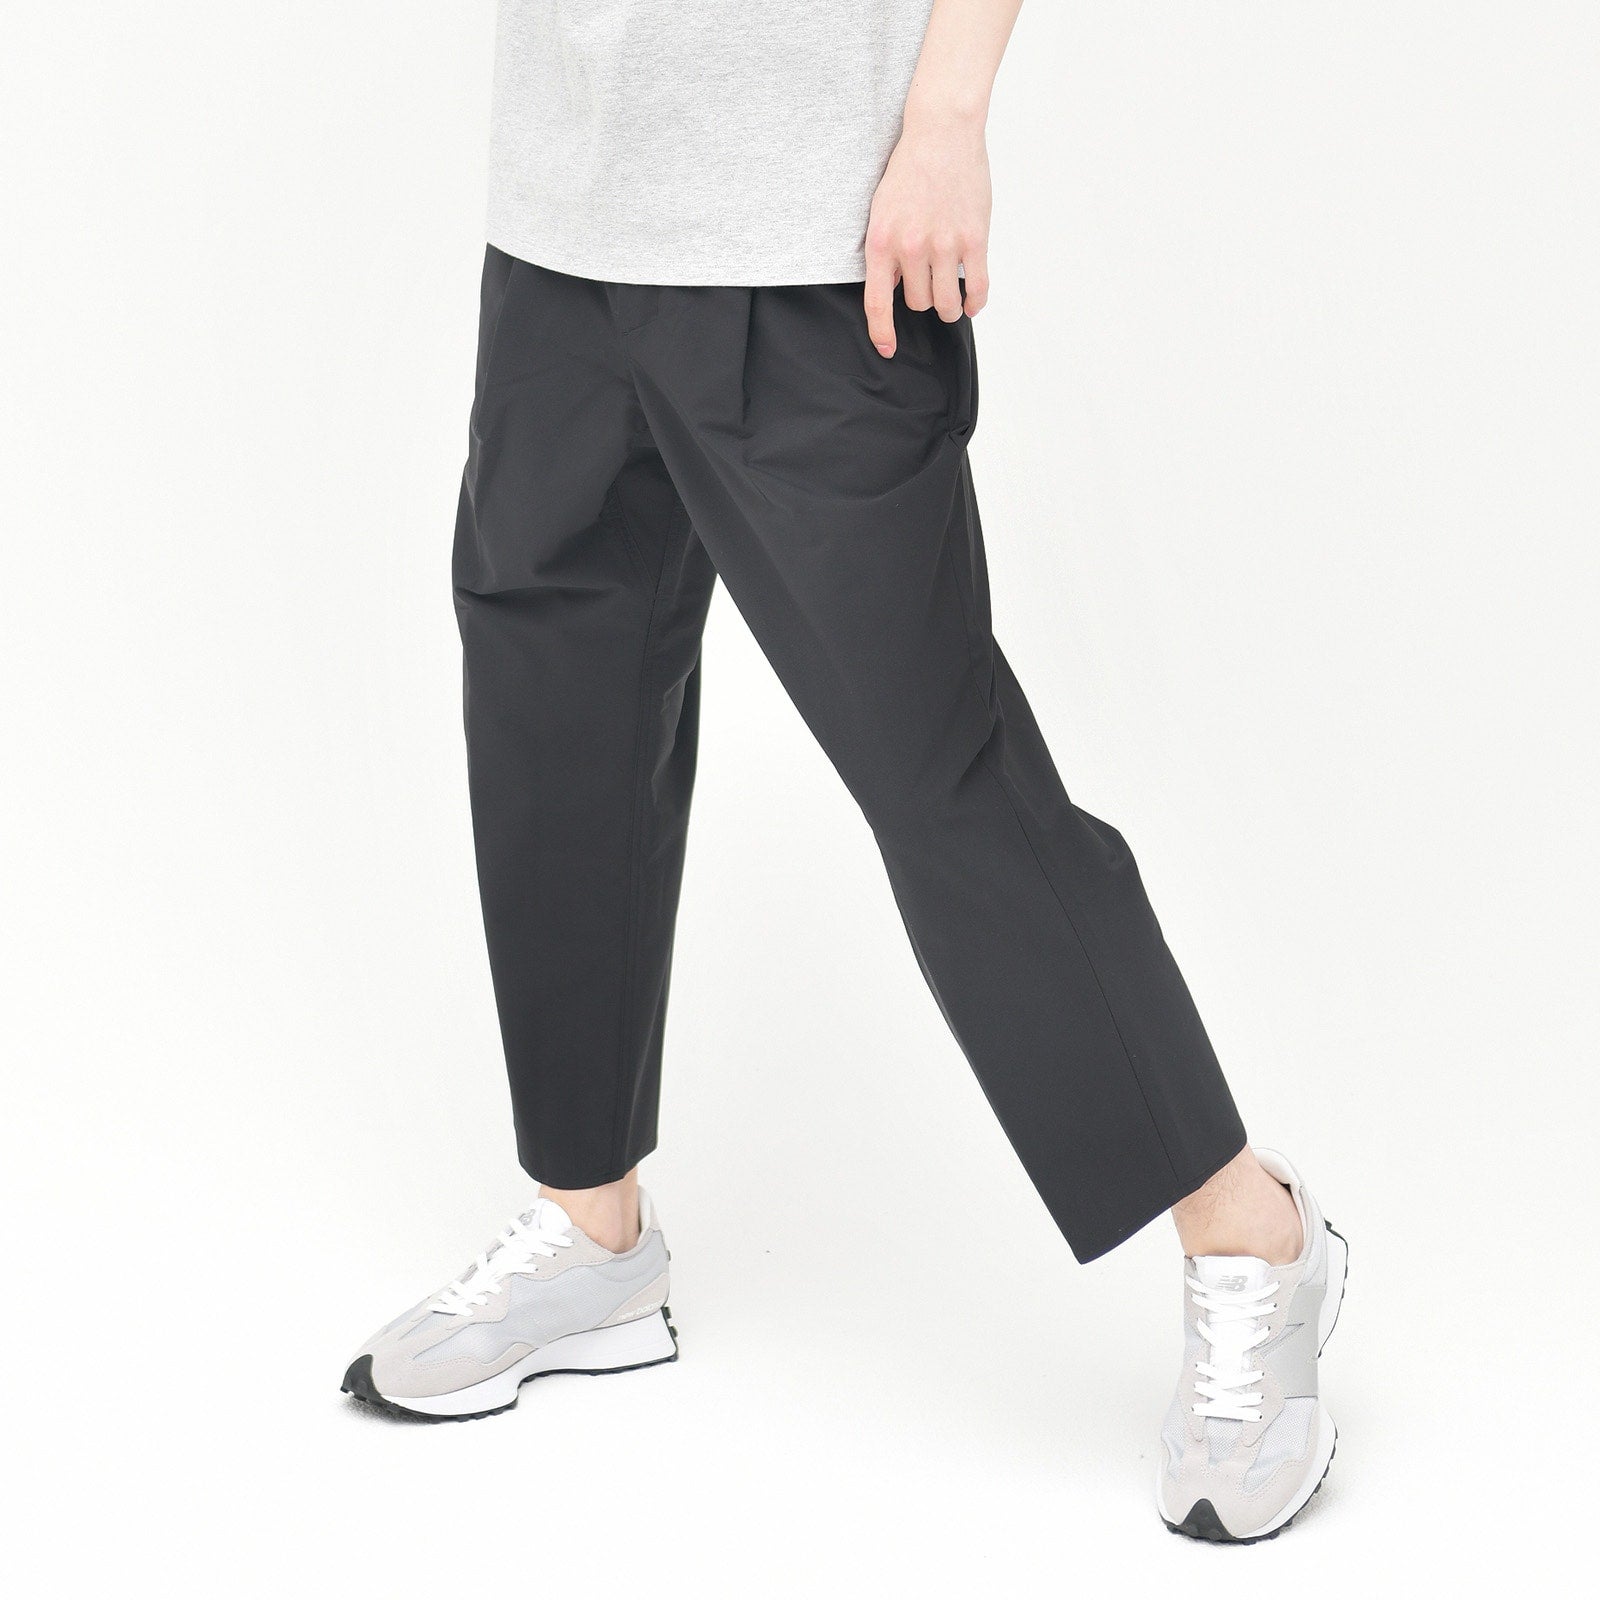 NB公式】ニューバランス | Met24 WIDE TAPERED FIT|New Balance【公式 